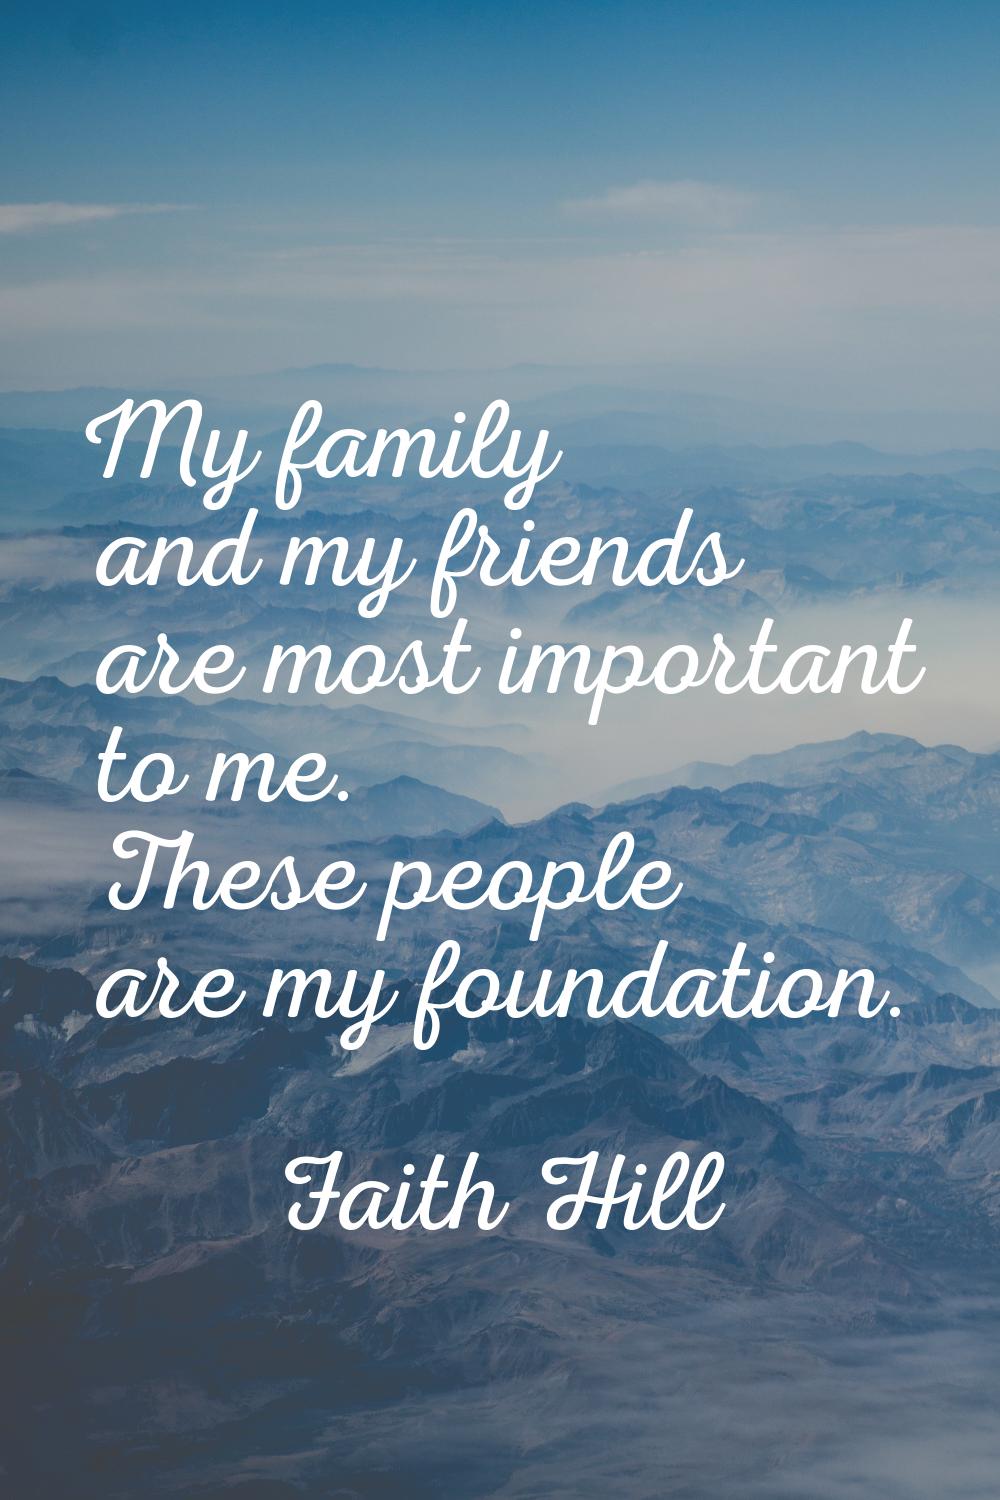 My family and my friends are most important to me. These people are my foundation.